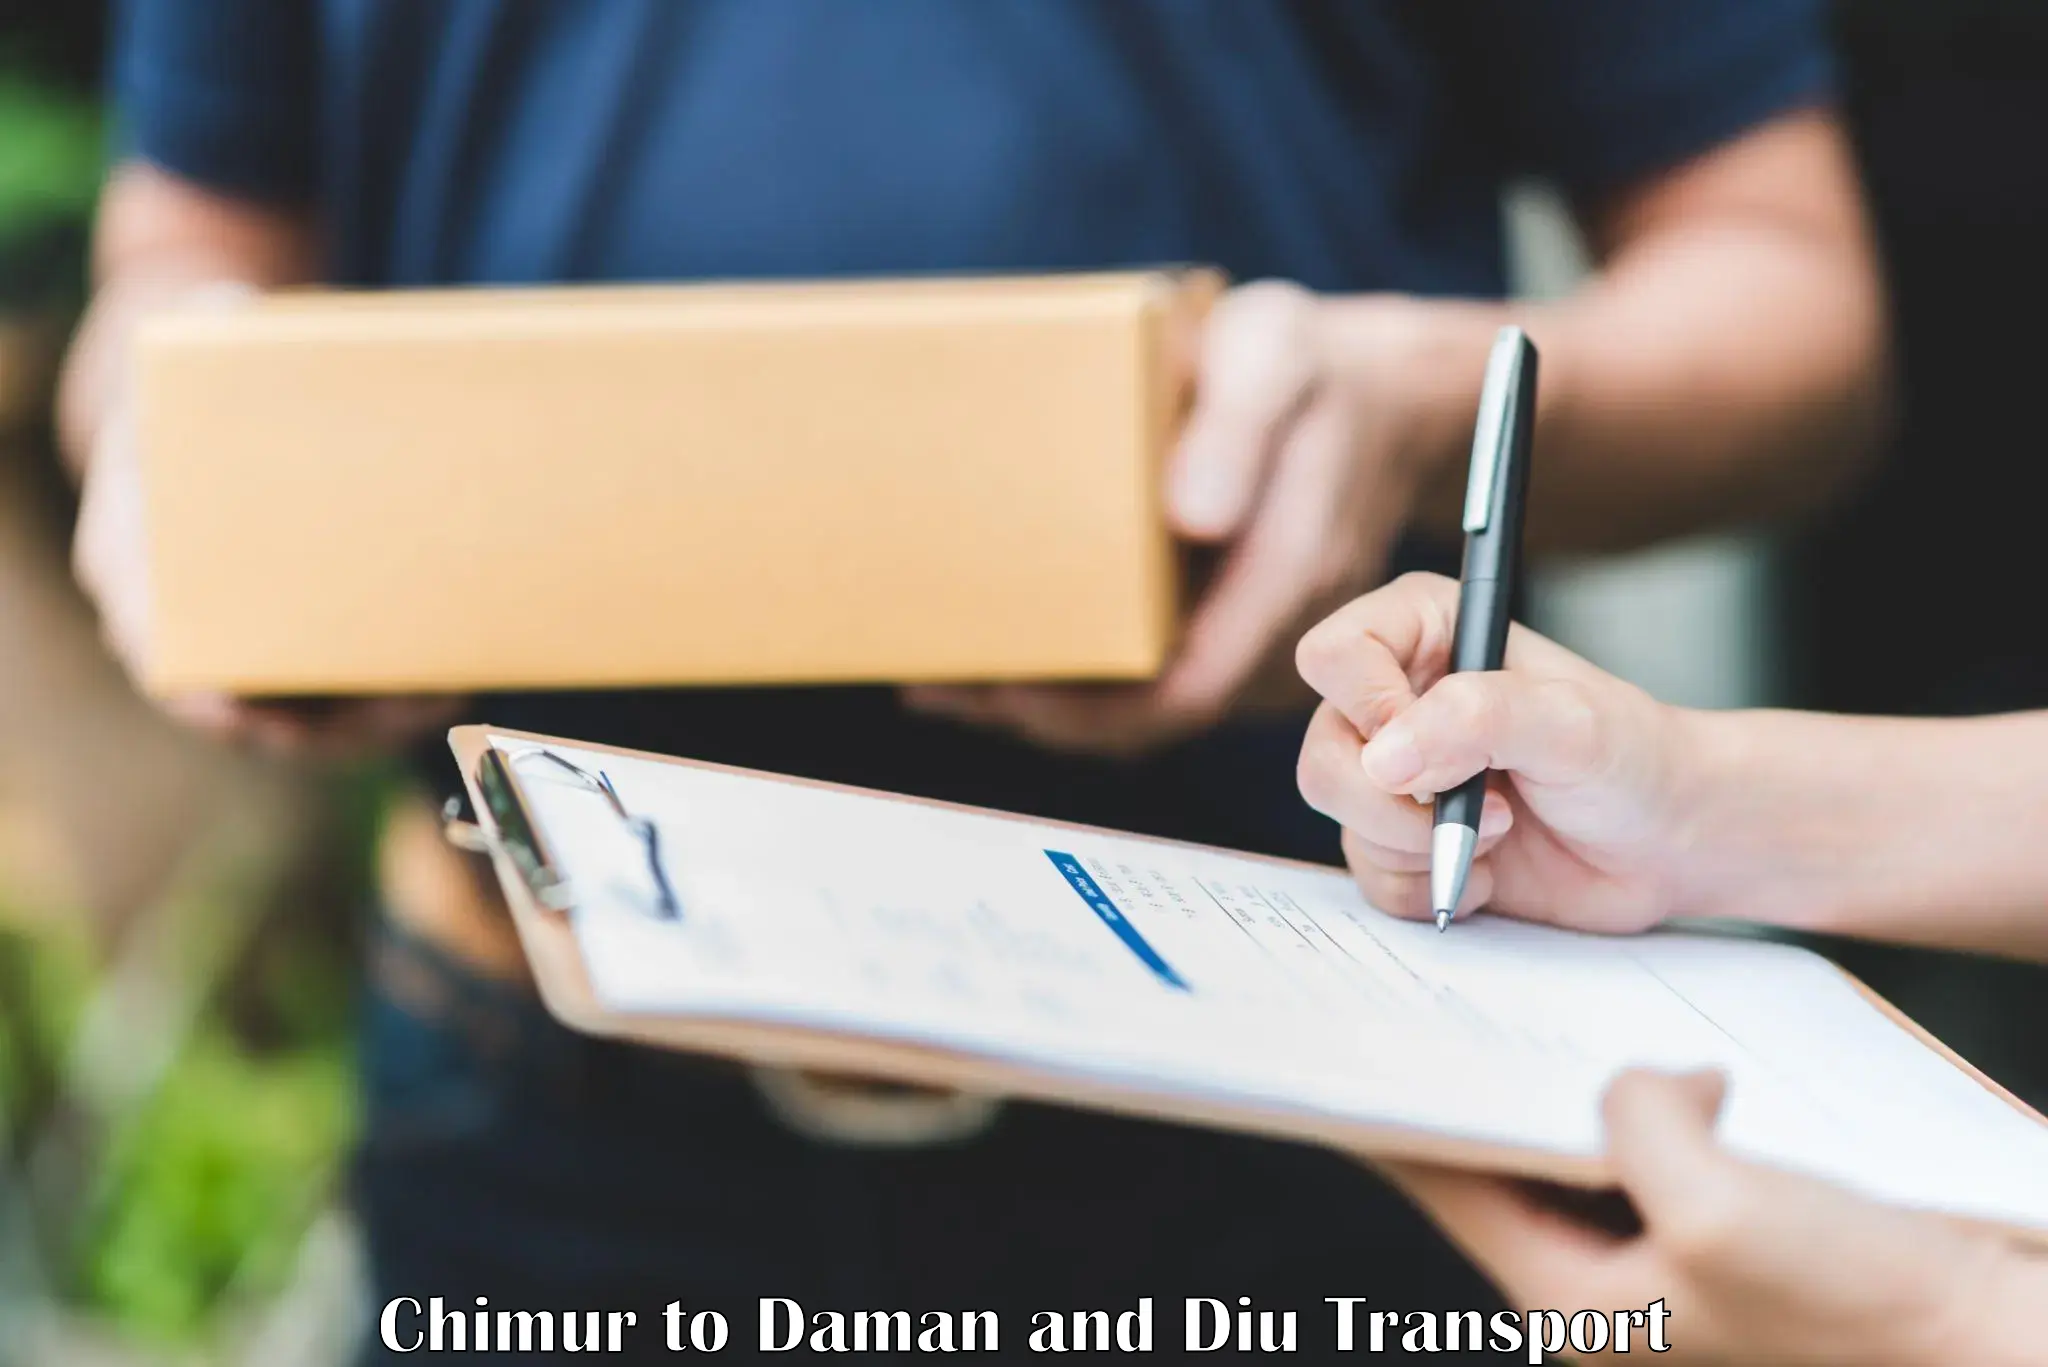 Container transportation services Chimur to Diu